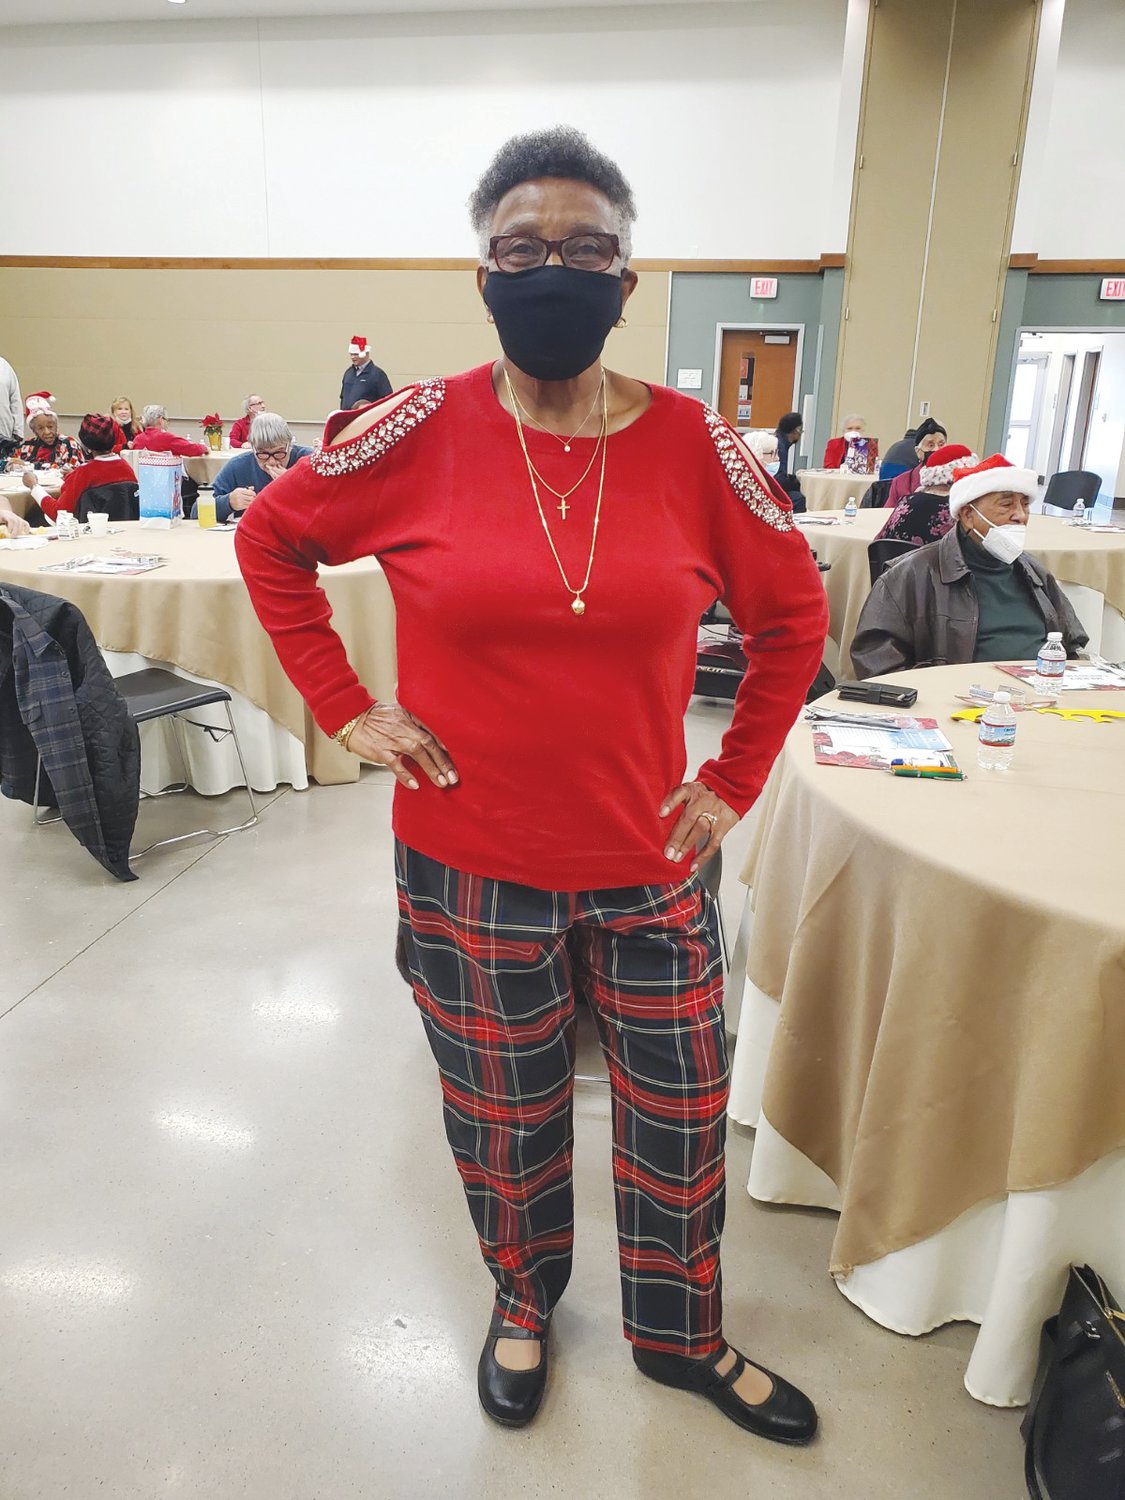 Betty Cherry dressed festively for the Council on Aging's holiday party.